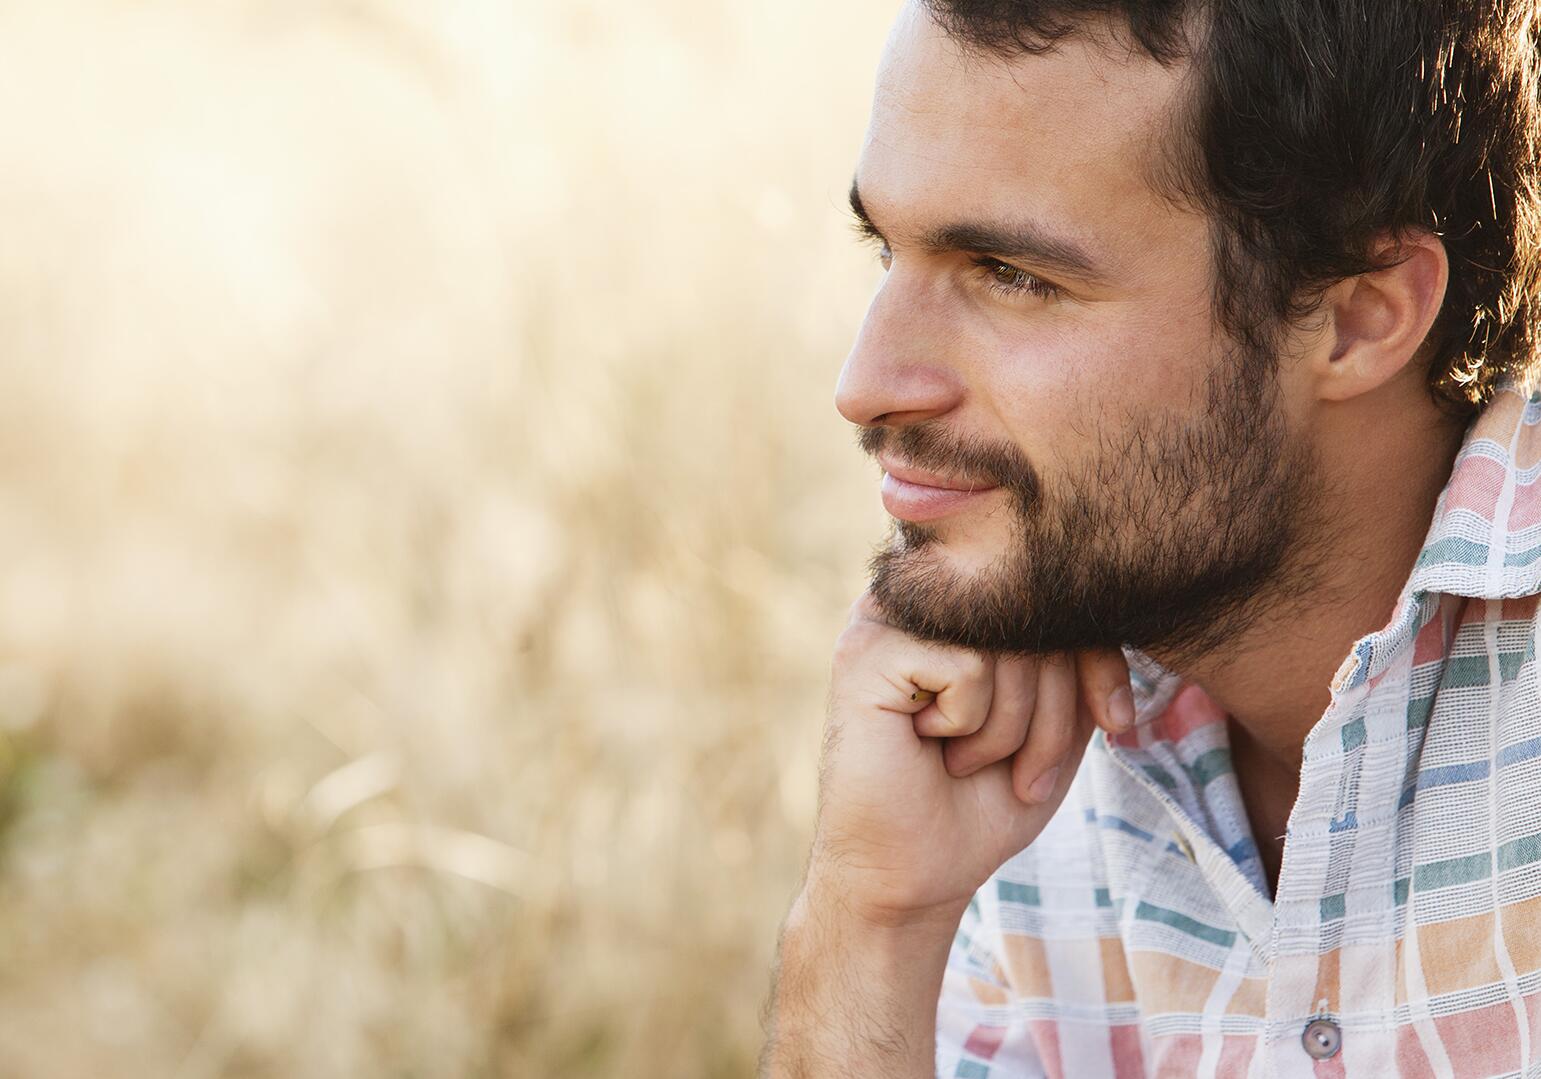 Man in field, deep in thought, smiling